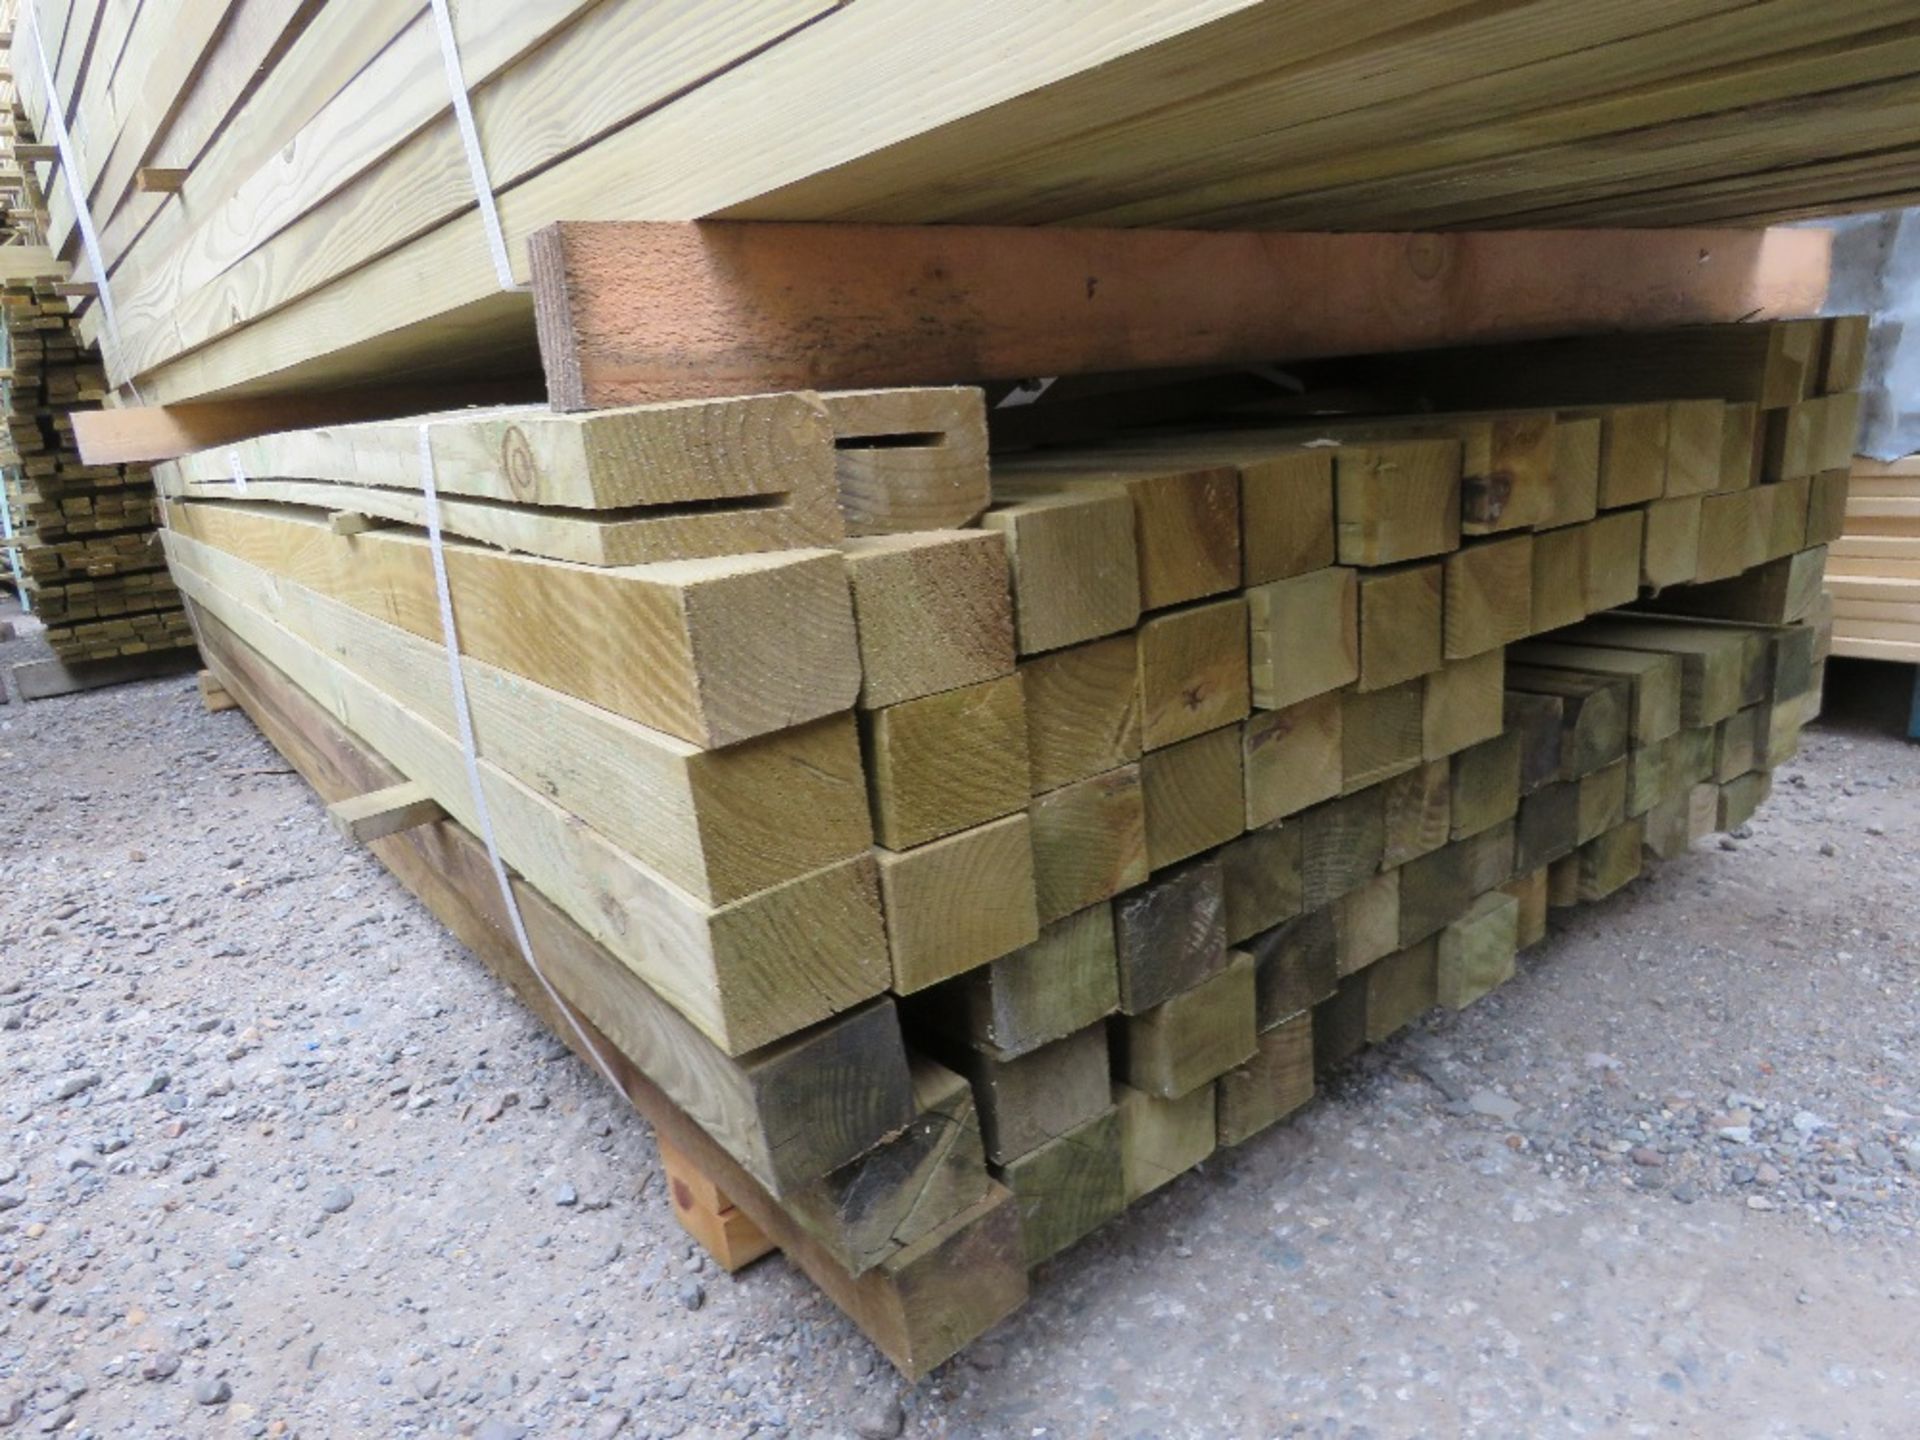 PACK OF TREATED TIMBER POSTS: 2.4M LENGTH 55MM X 50MM APPROX. 90NO IN TOTAL APPROX.